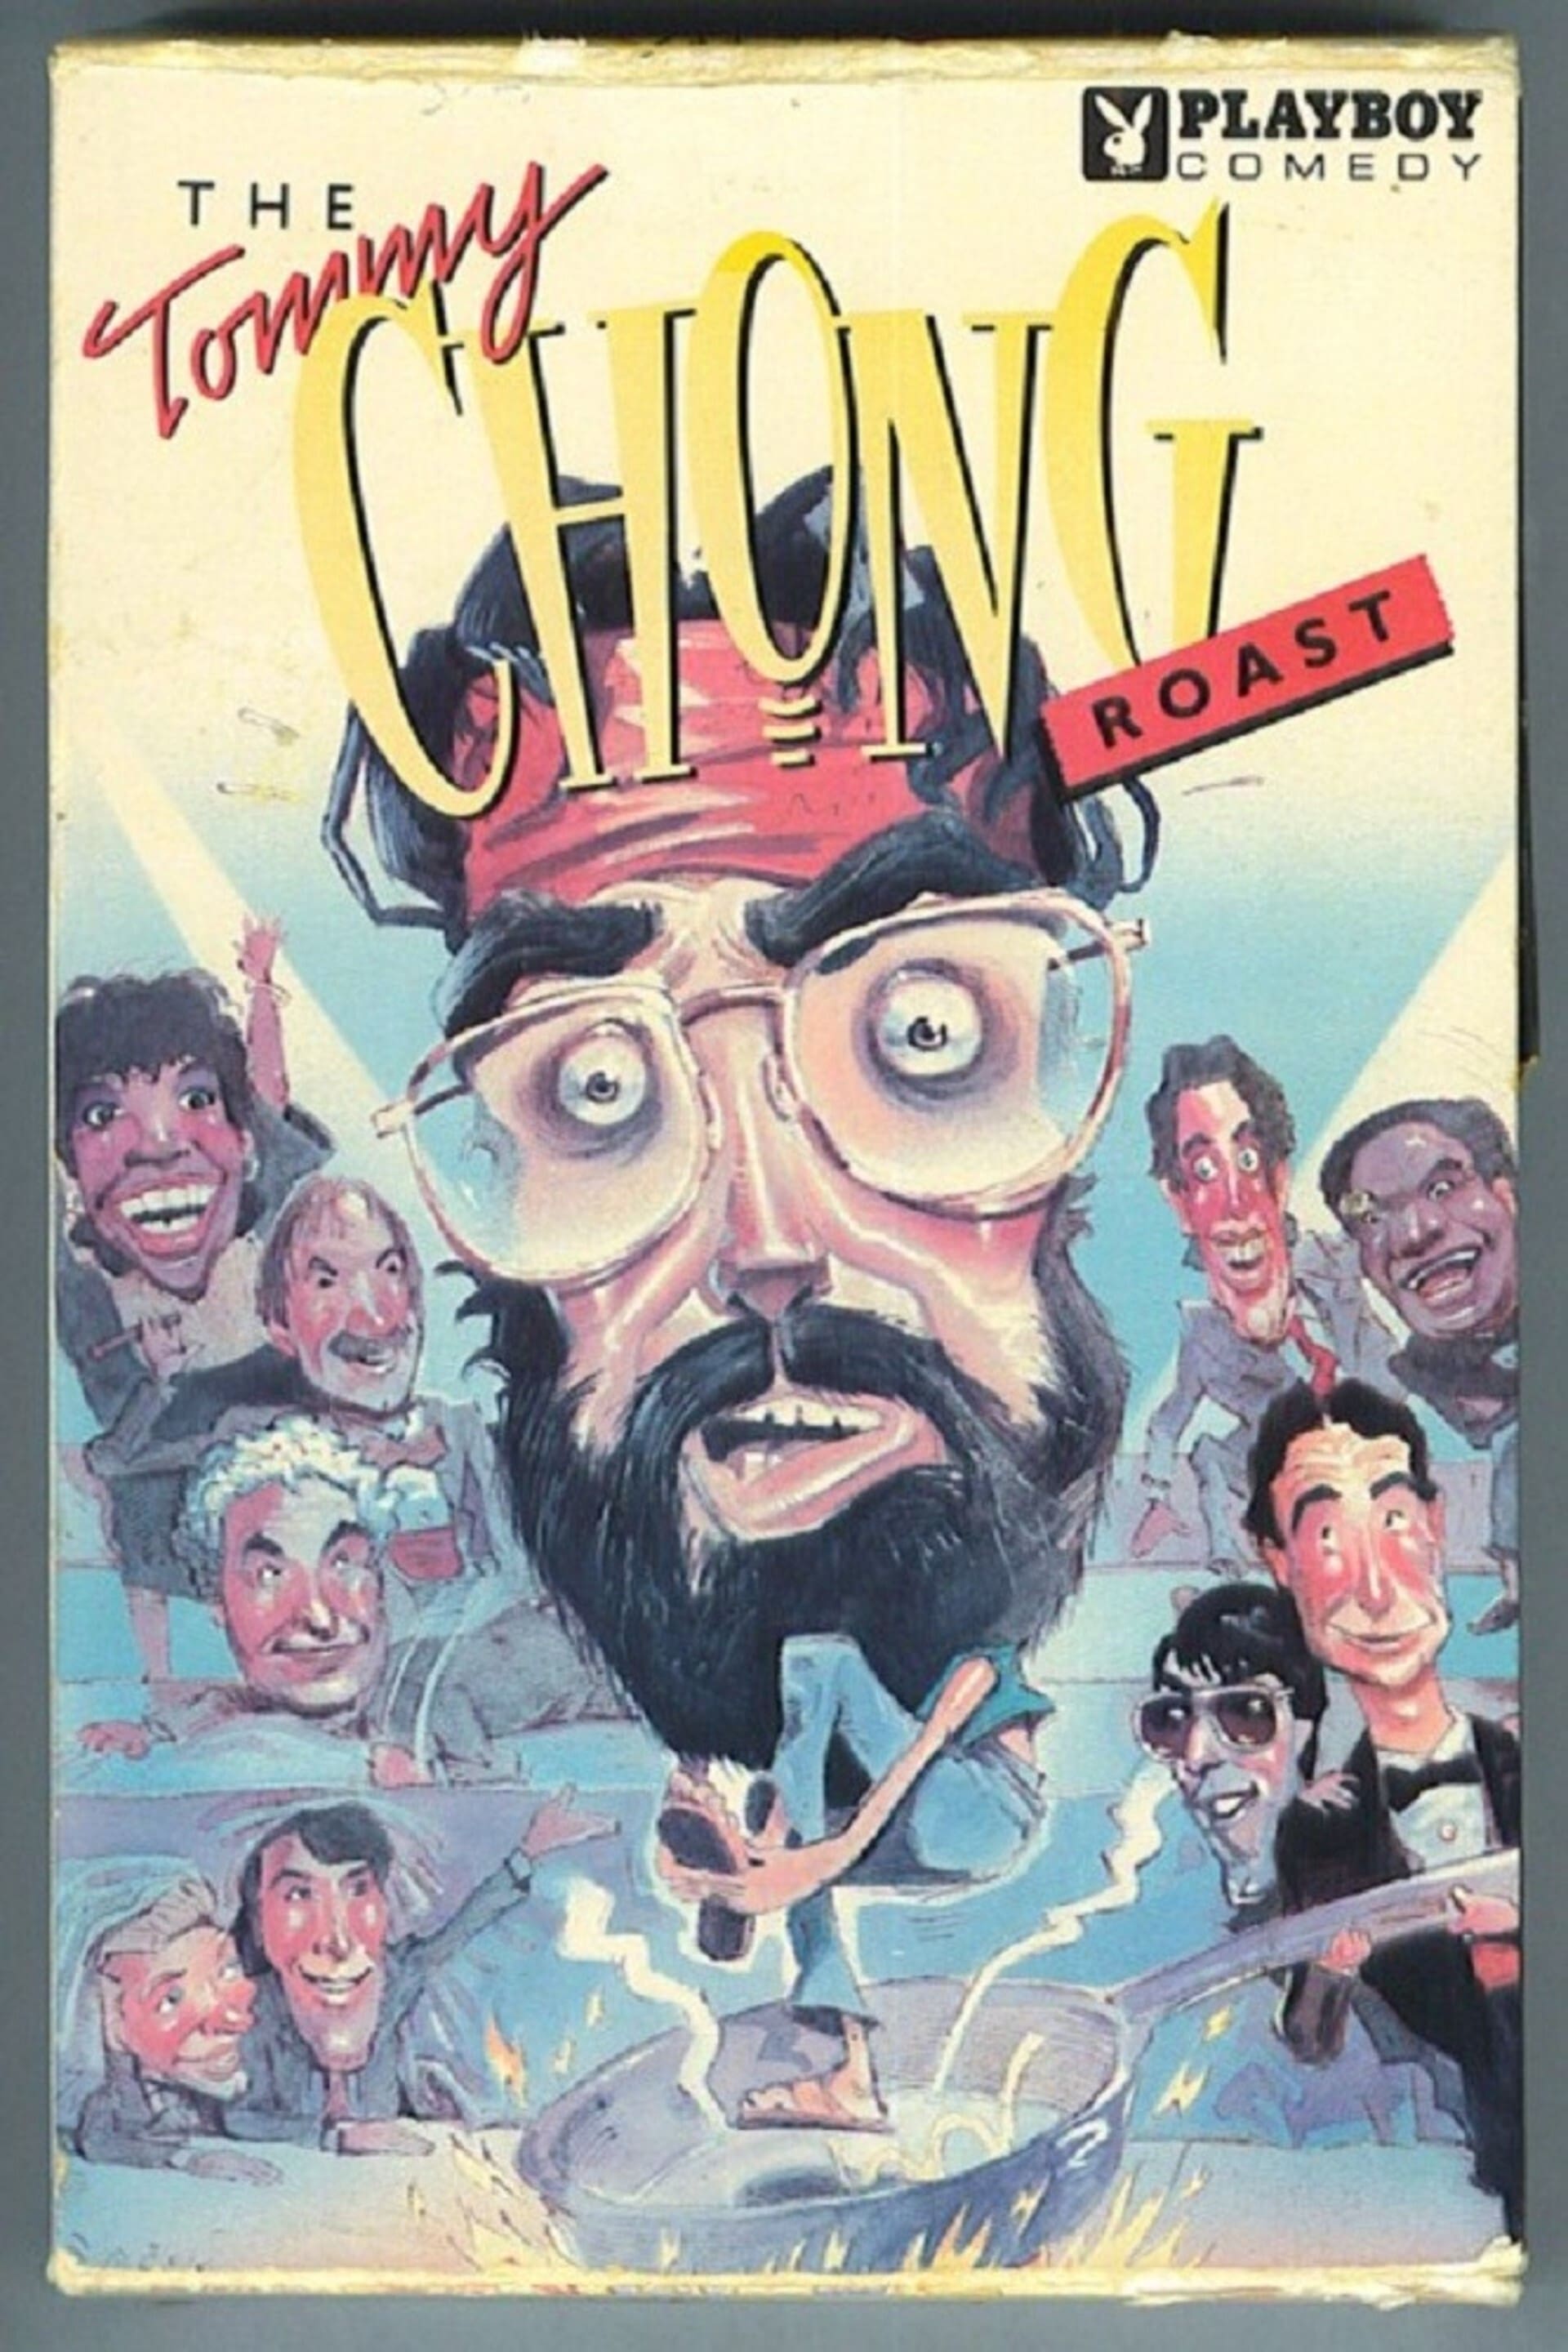 The Tommy Chong Roast (1989)